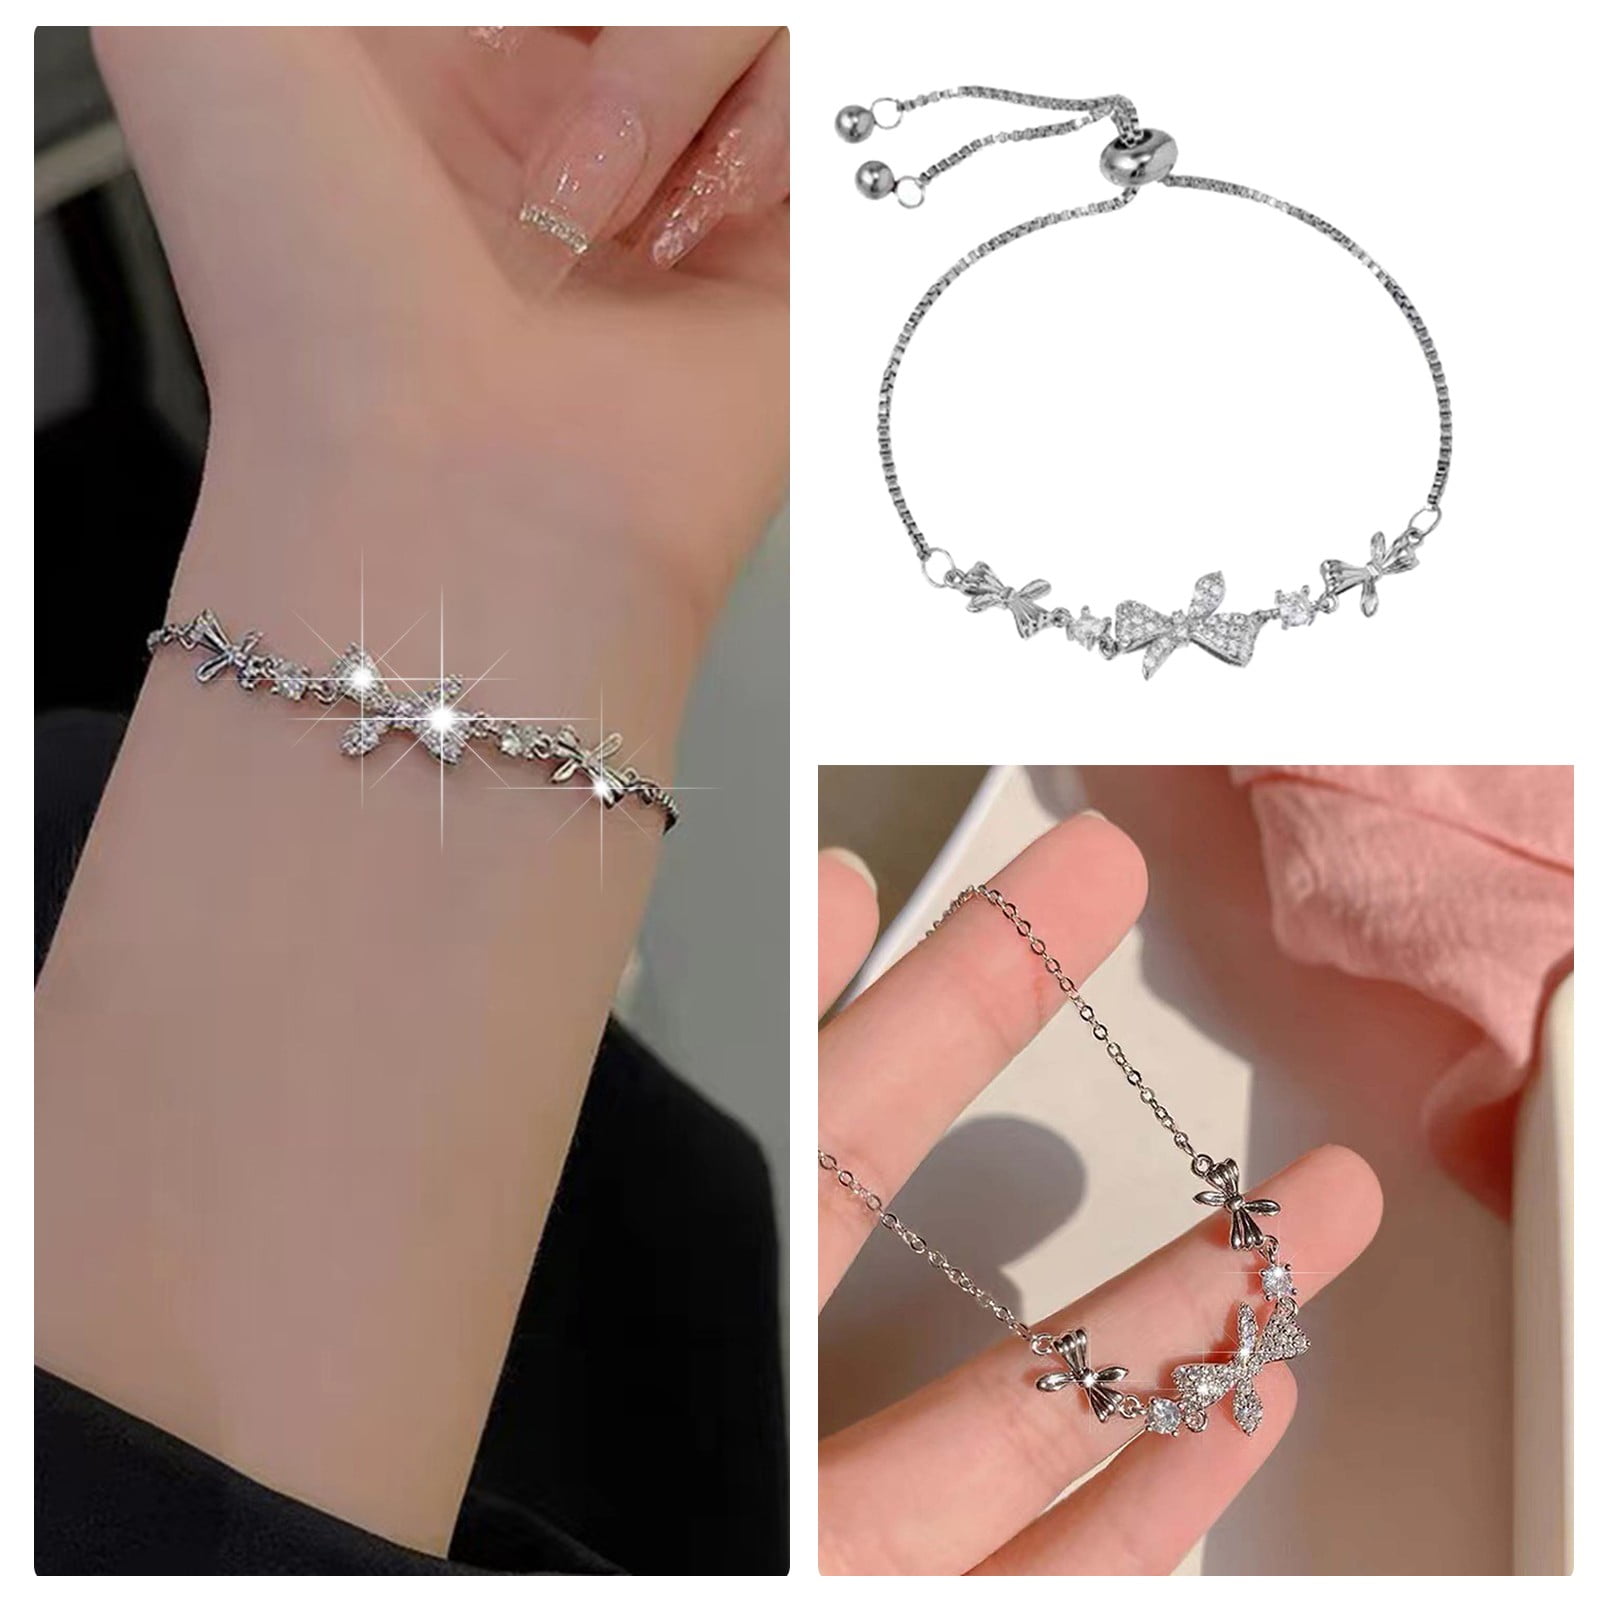 Amazon.com: Link Chain Pearl Bracelet Jewelry for Girls Simple Diamond  Inlaid Ladies Bracelet Bracelet Cuff- Wrap Bangle- Link Jewelry Gifts (A,  One Size): Clothing, Shoes & Jewelry